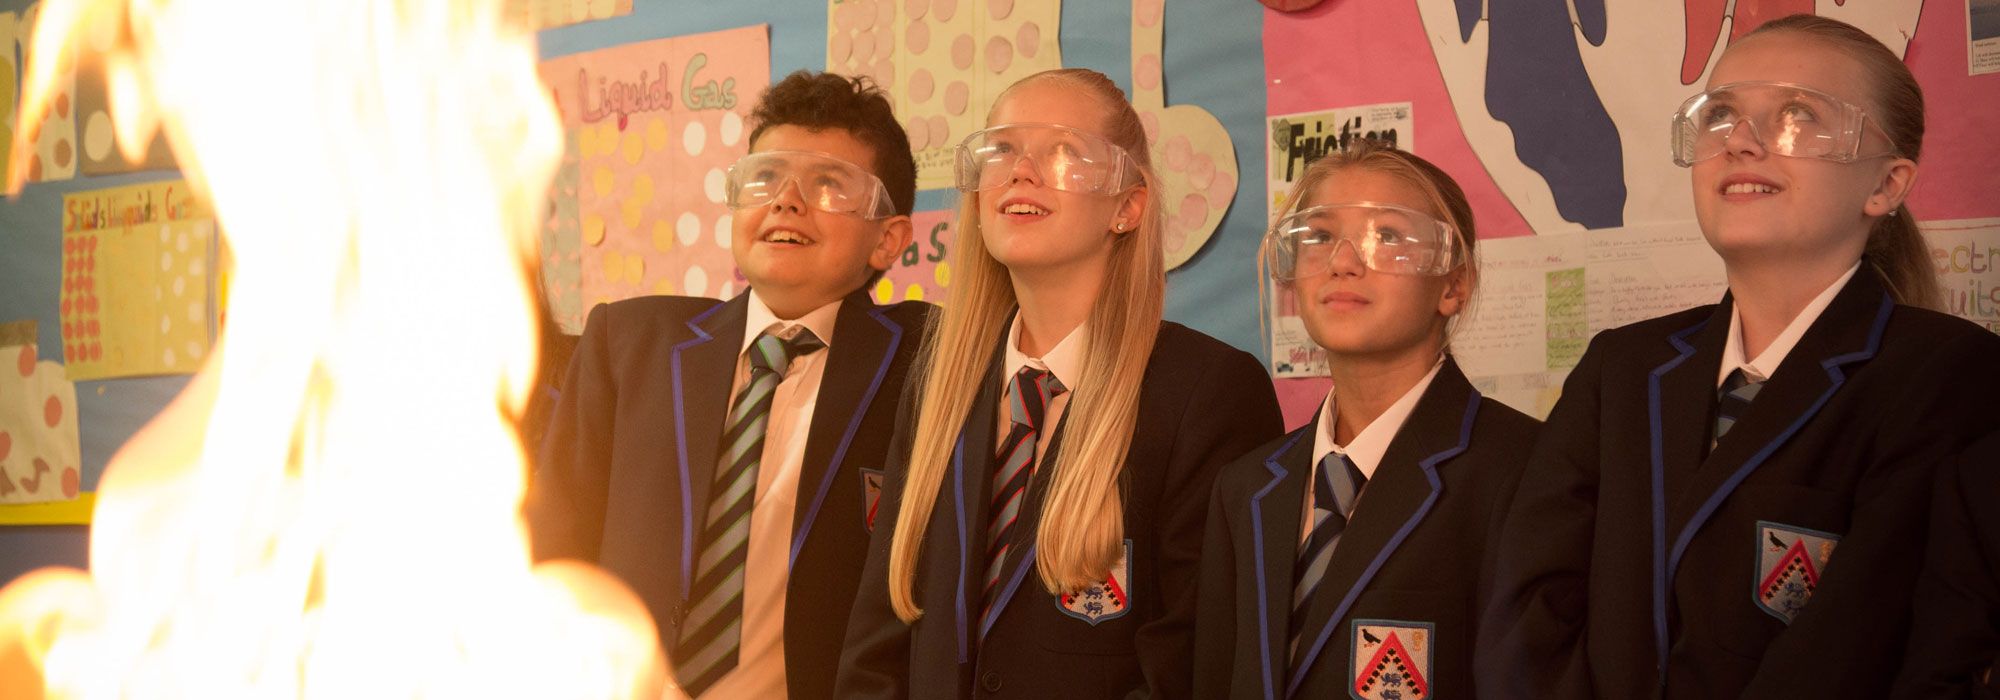 Science class with pupils watching flammable chemicals